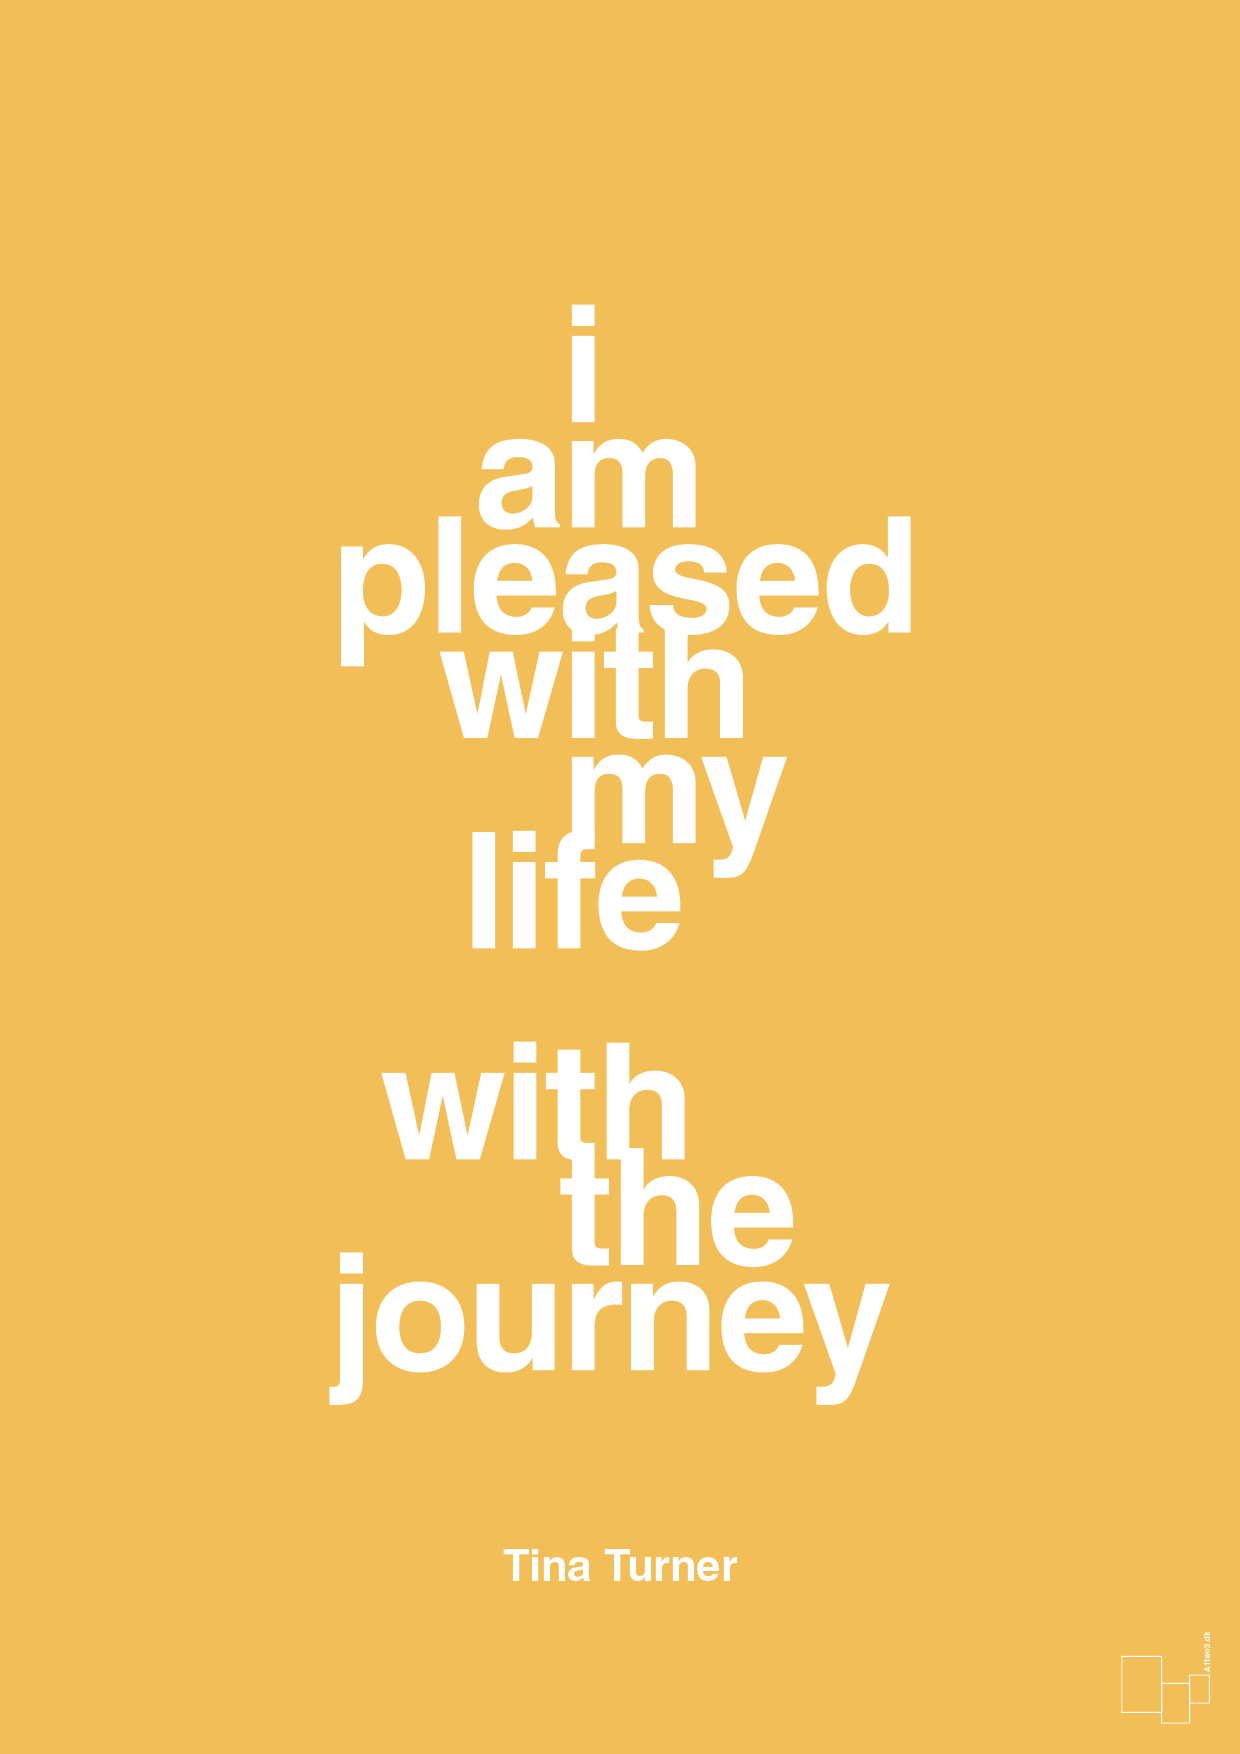 i am pleased with my life with the journey - Plakat med Citater i Honeycomb